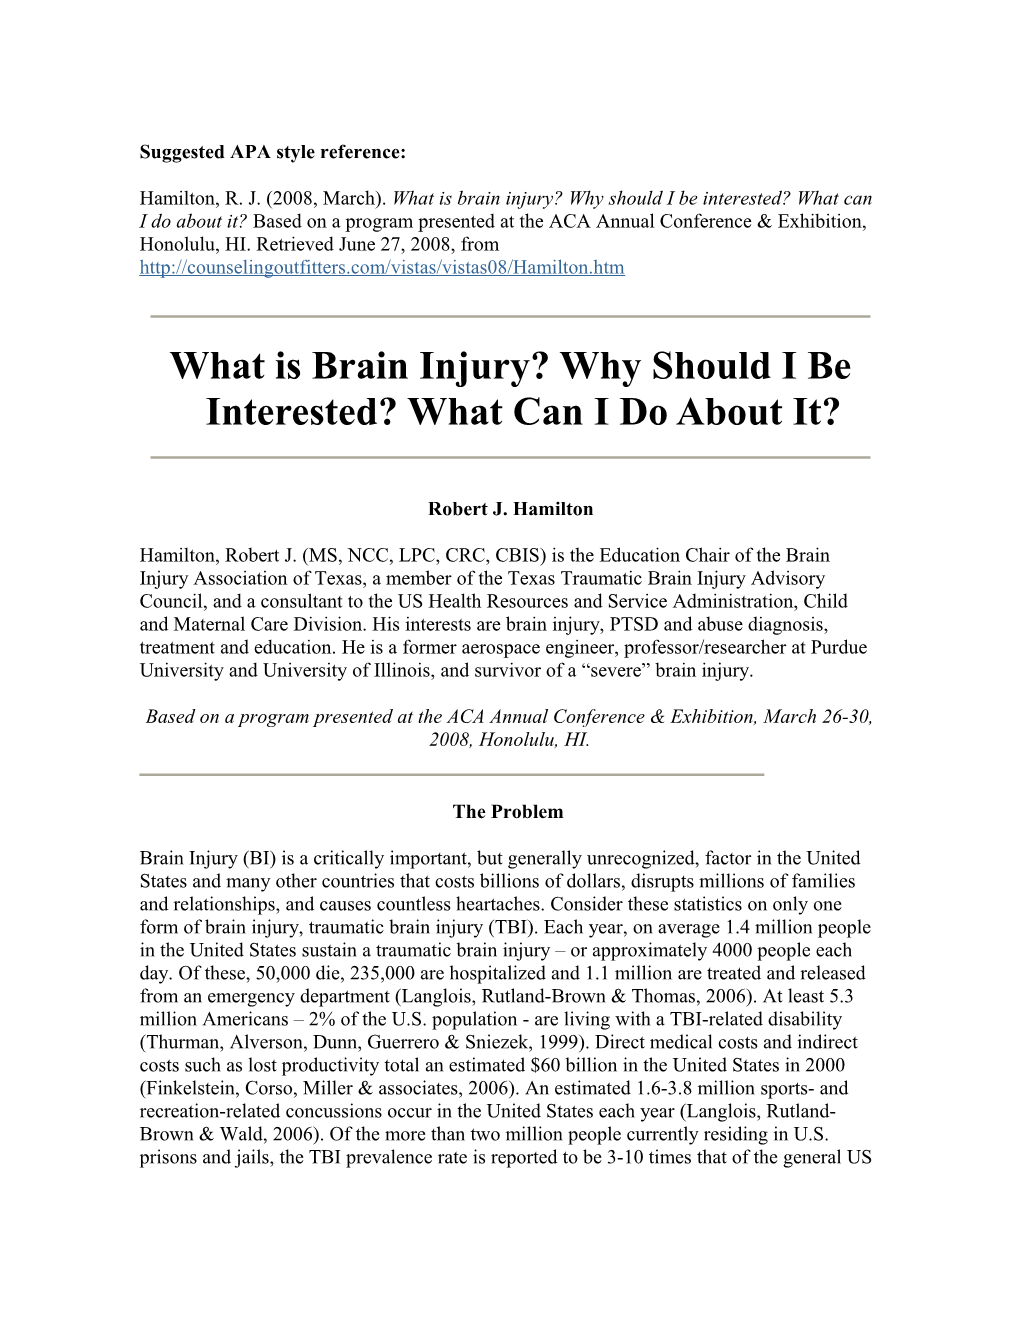 What Is Brain Injury? Why Should I Be Interested? What Can I Do About It?